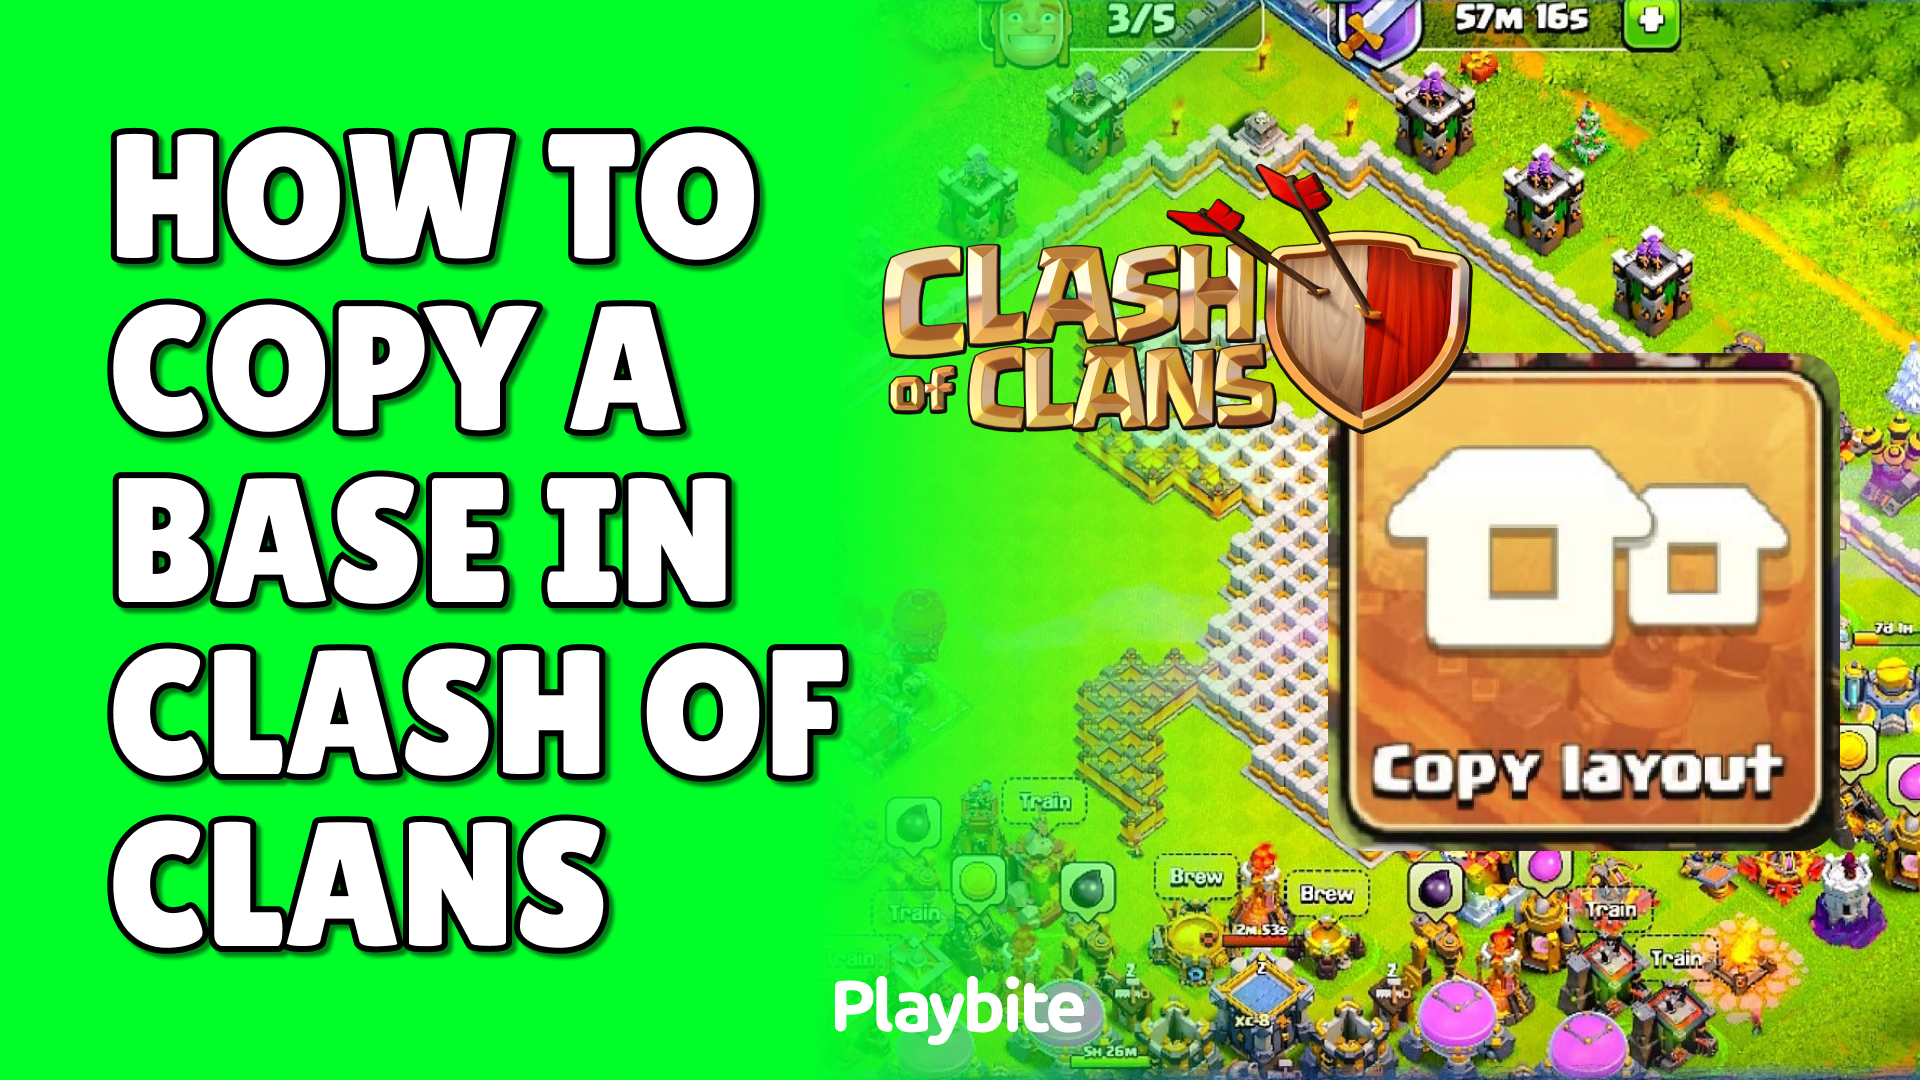 How To Copy A Base In Clash Of Clans